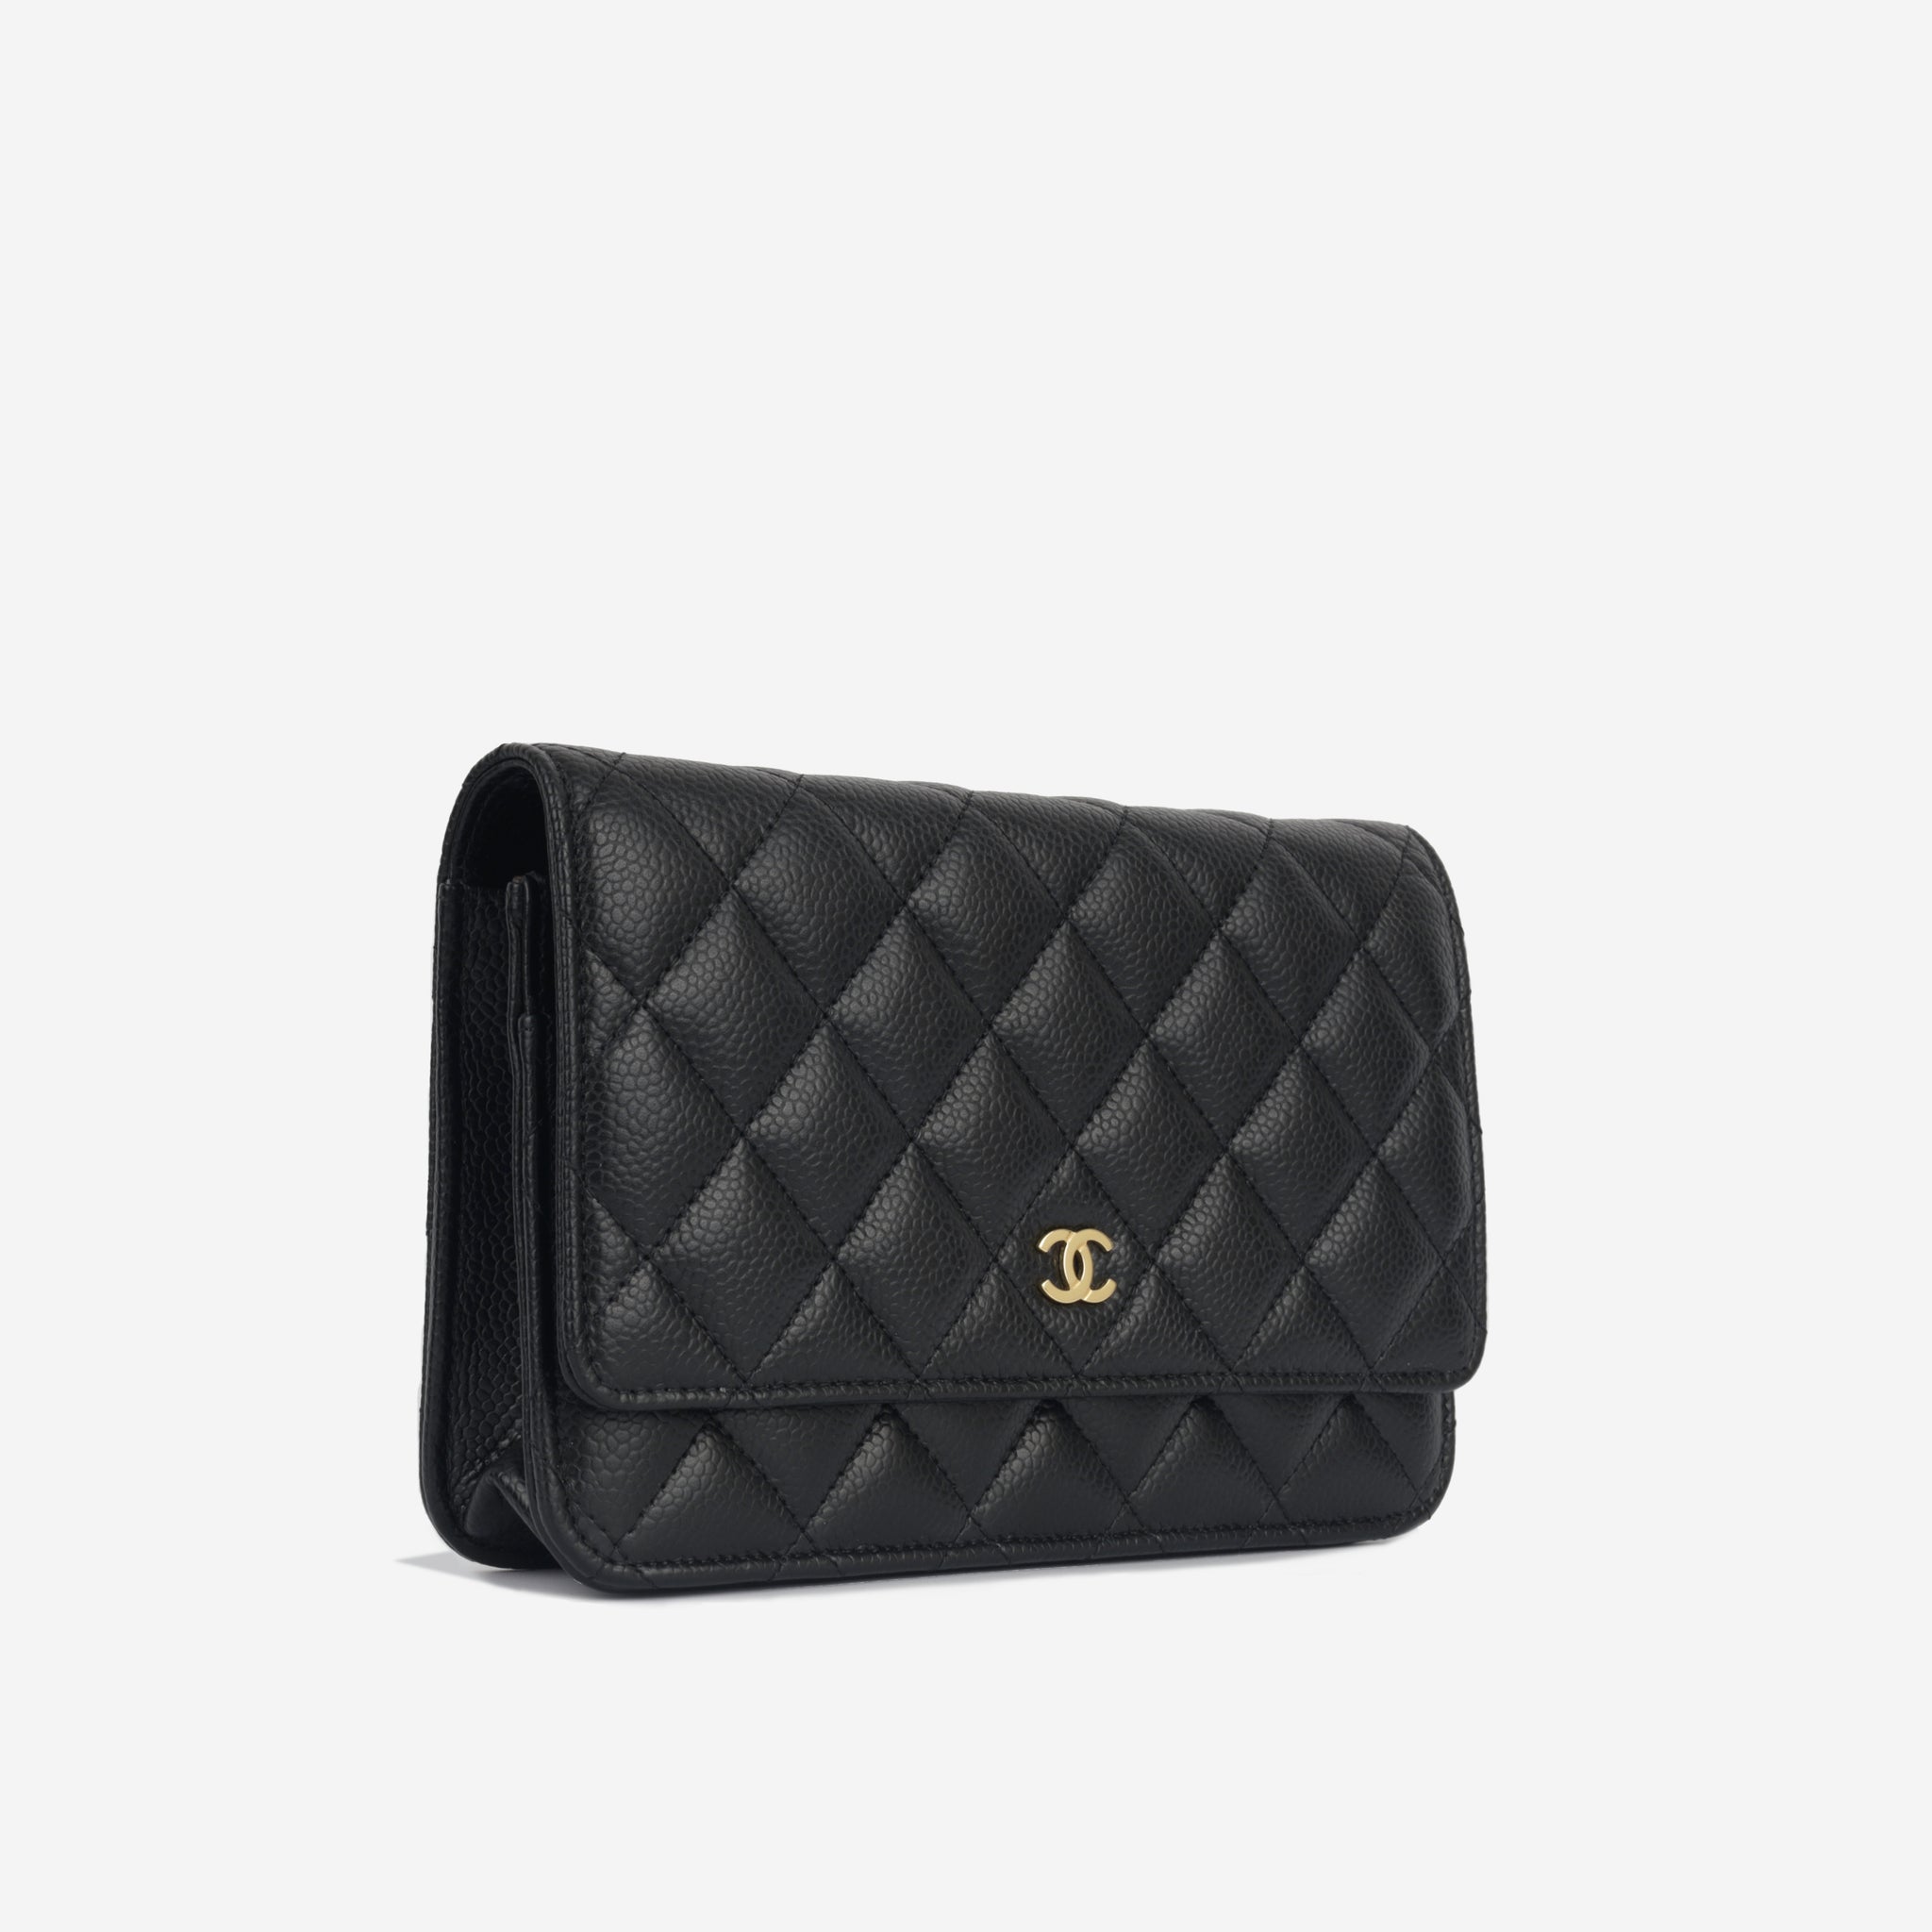 Chanel - Classic Wallet On Chain - Black Caviar - GHW - Immaculate